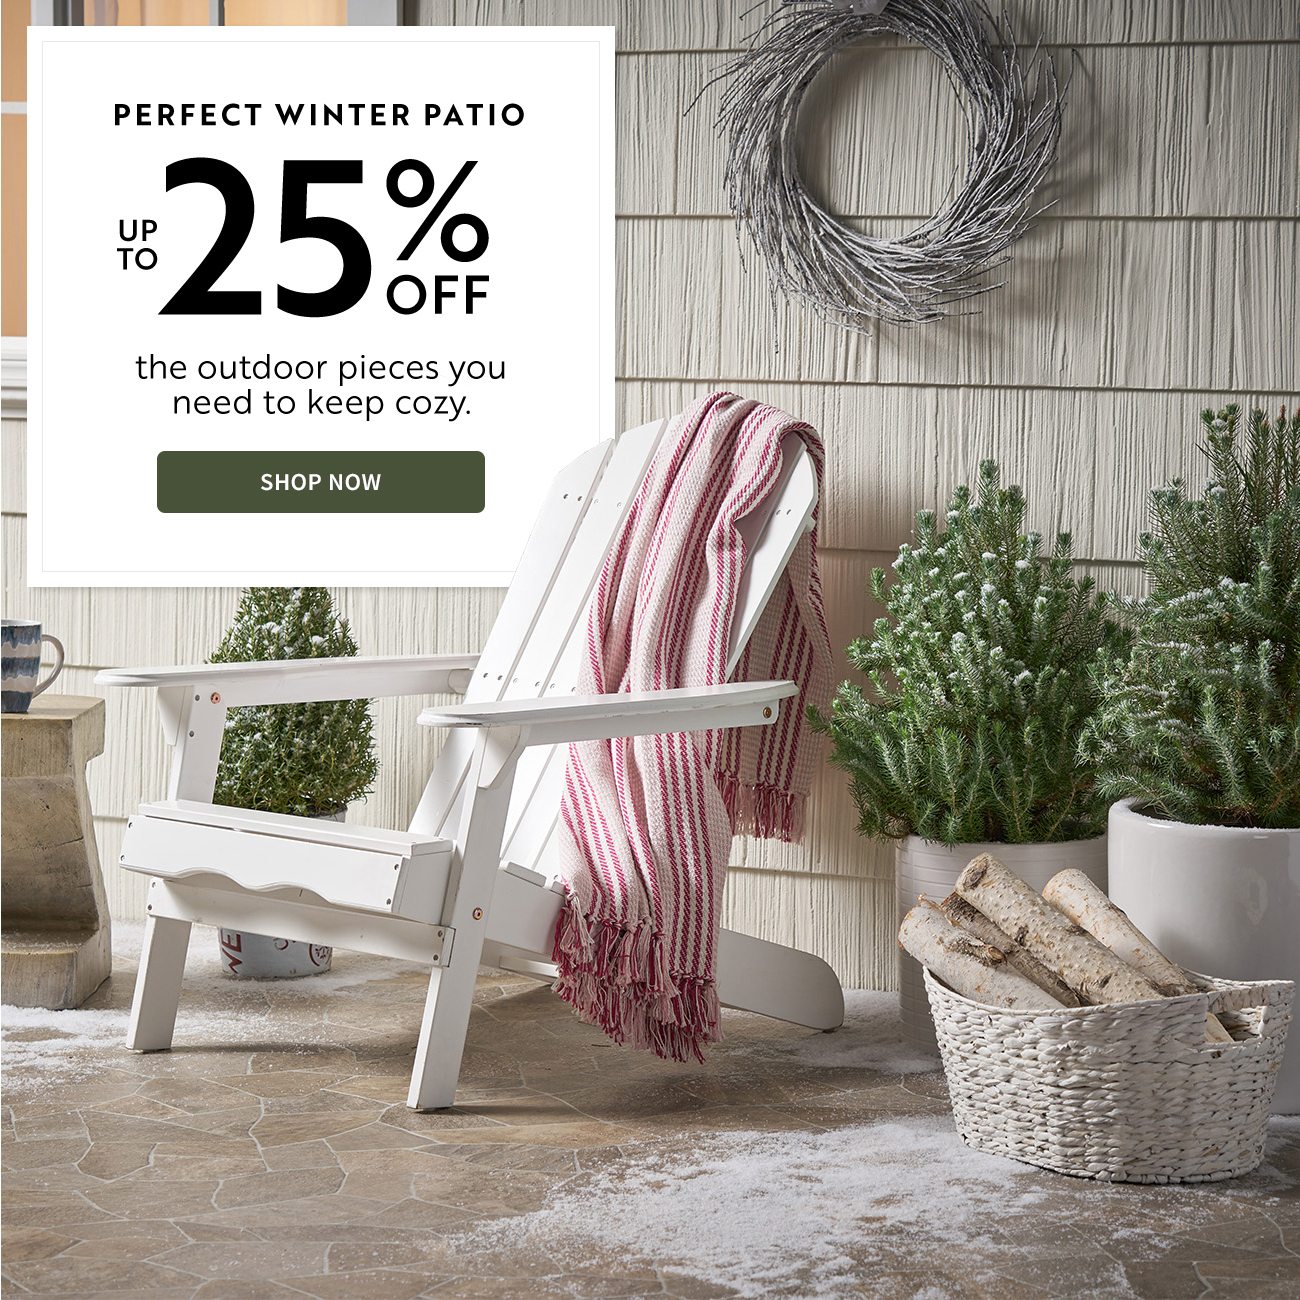 Perfect Winter Patio Up To 25% Off | Shop Now